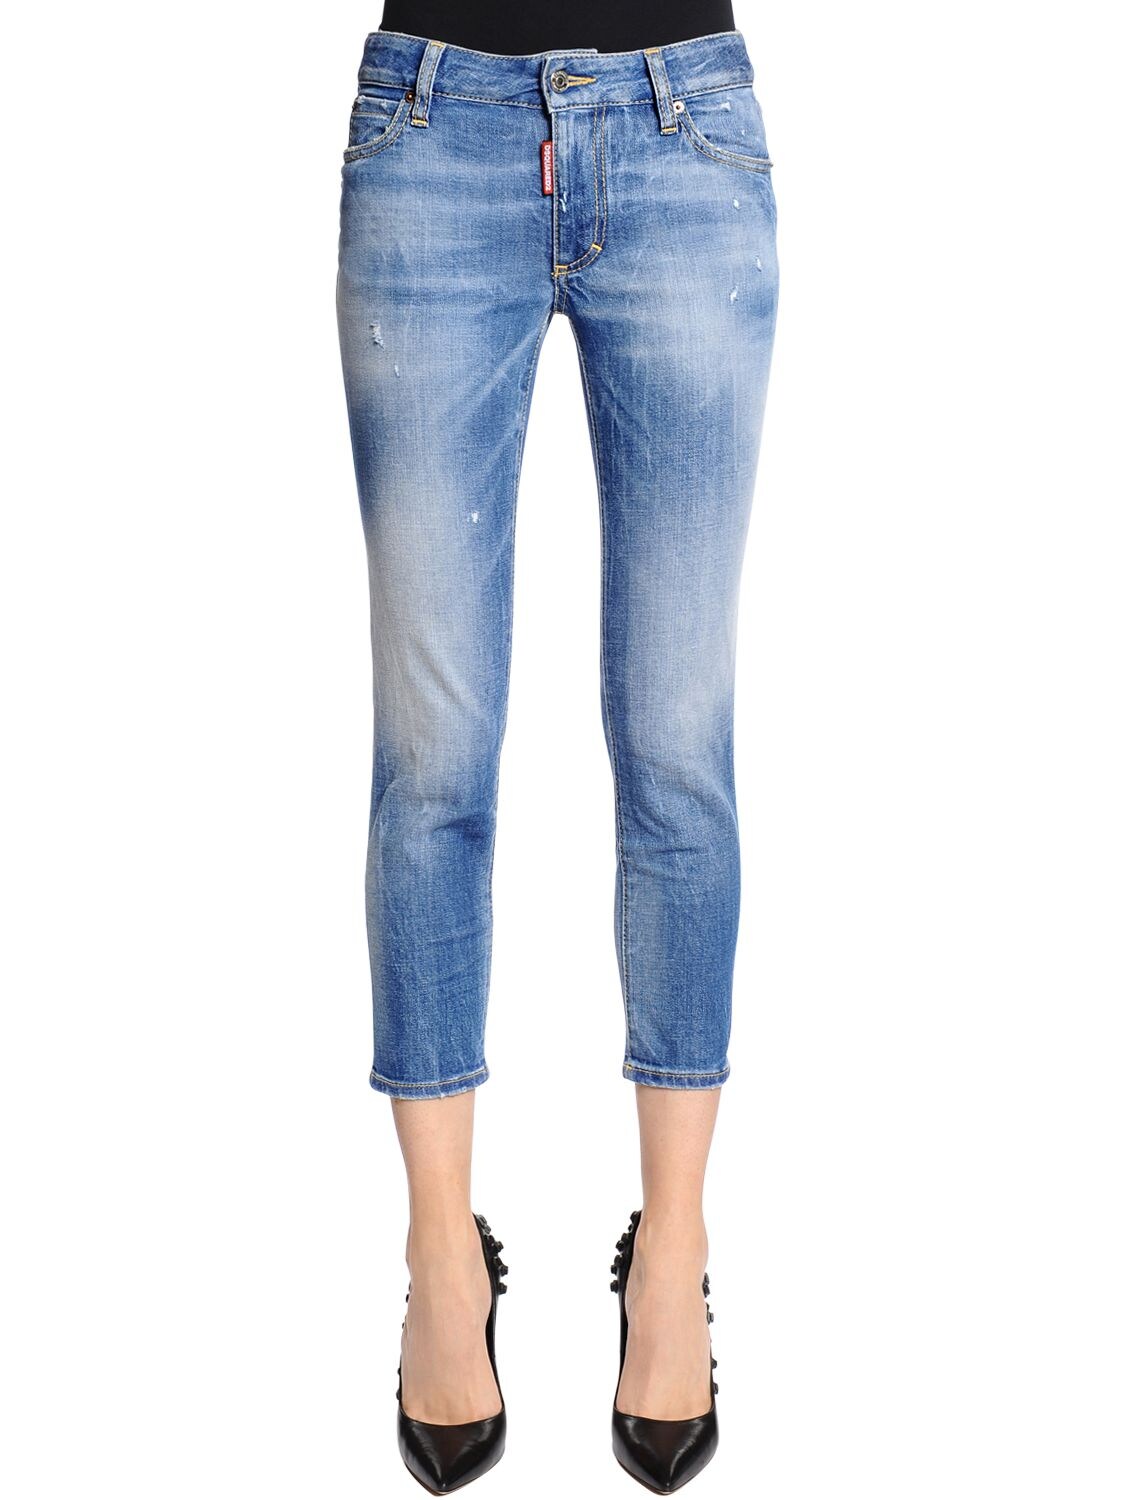 DSQUARED2 TWIGGY CROPPED FIT LIGHT DENIM JEANS,67I07Y040-NDCW0